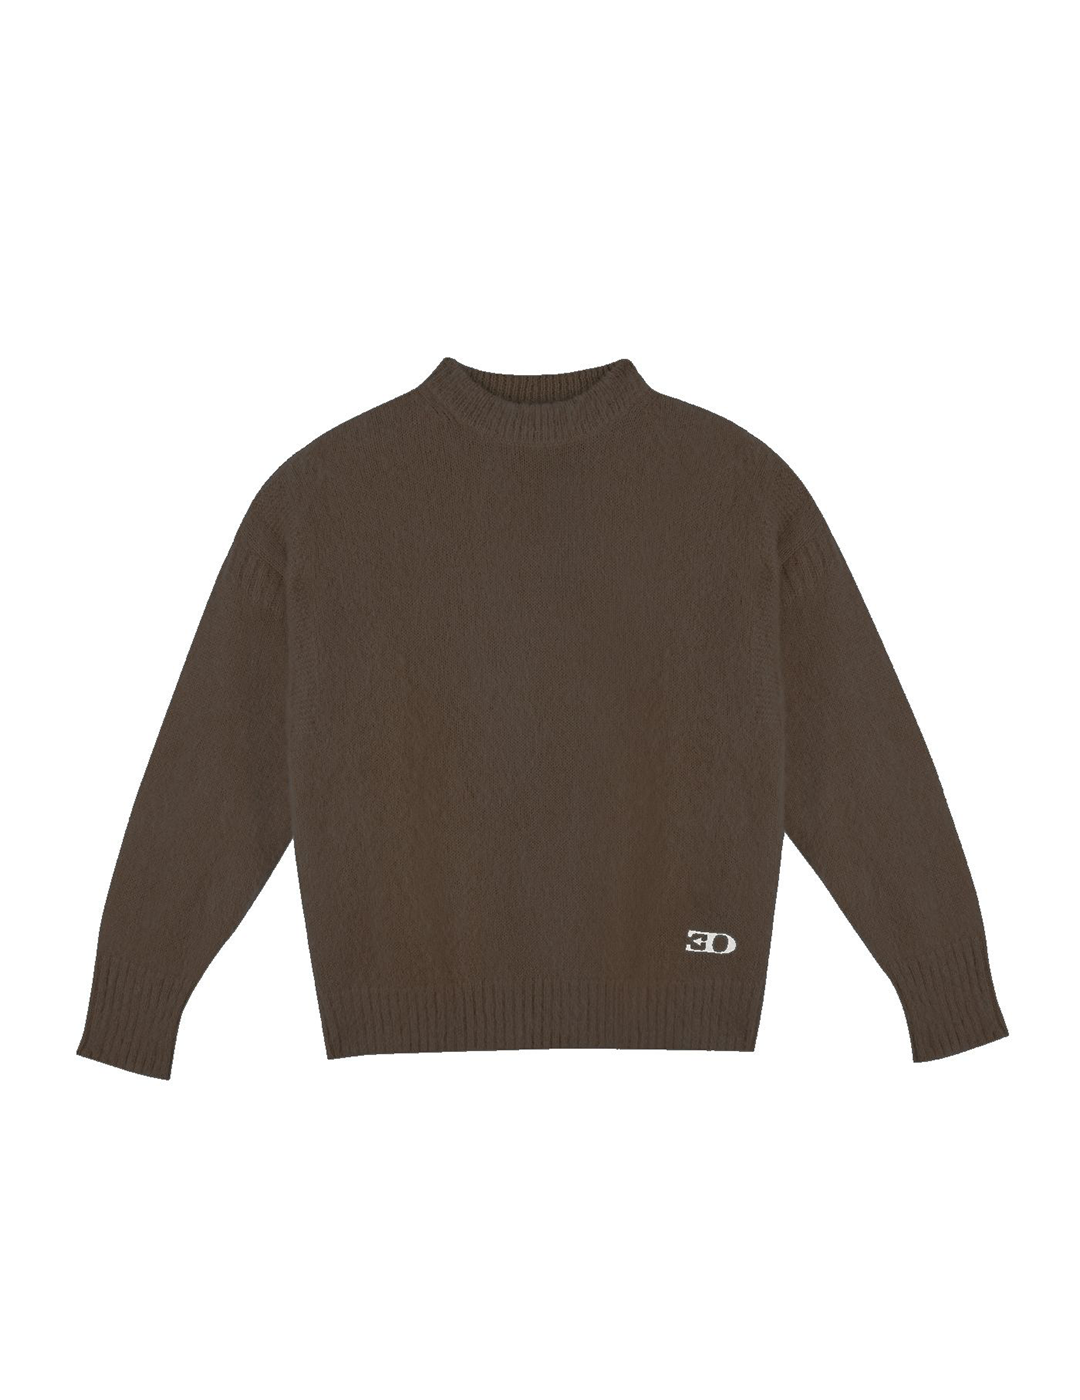 THE GUERNSEY JUMPER IN BROWN MOHAIR